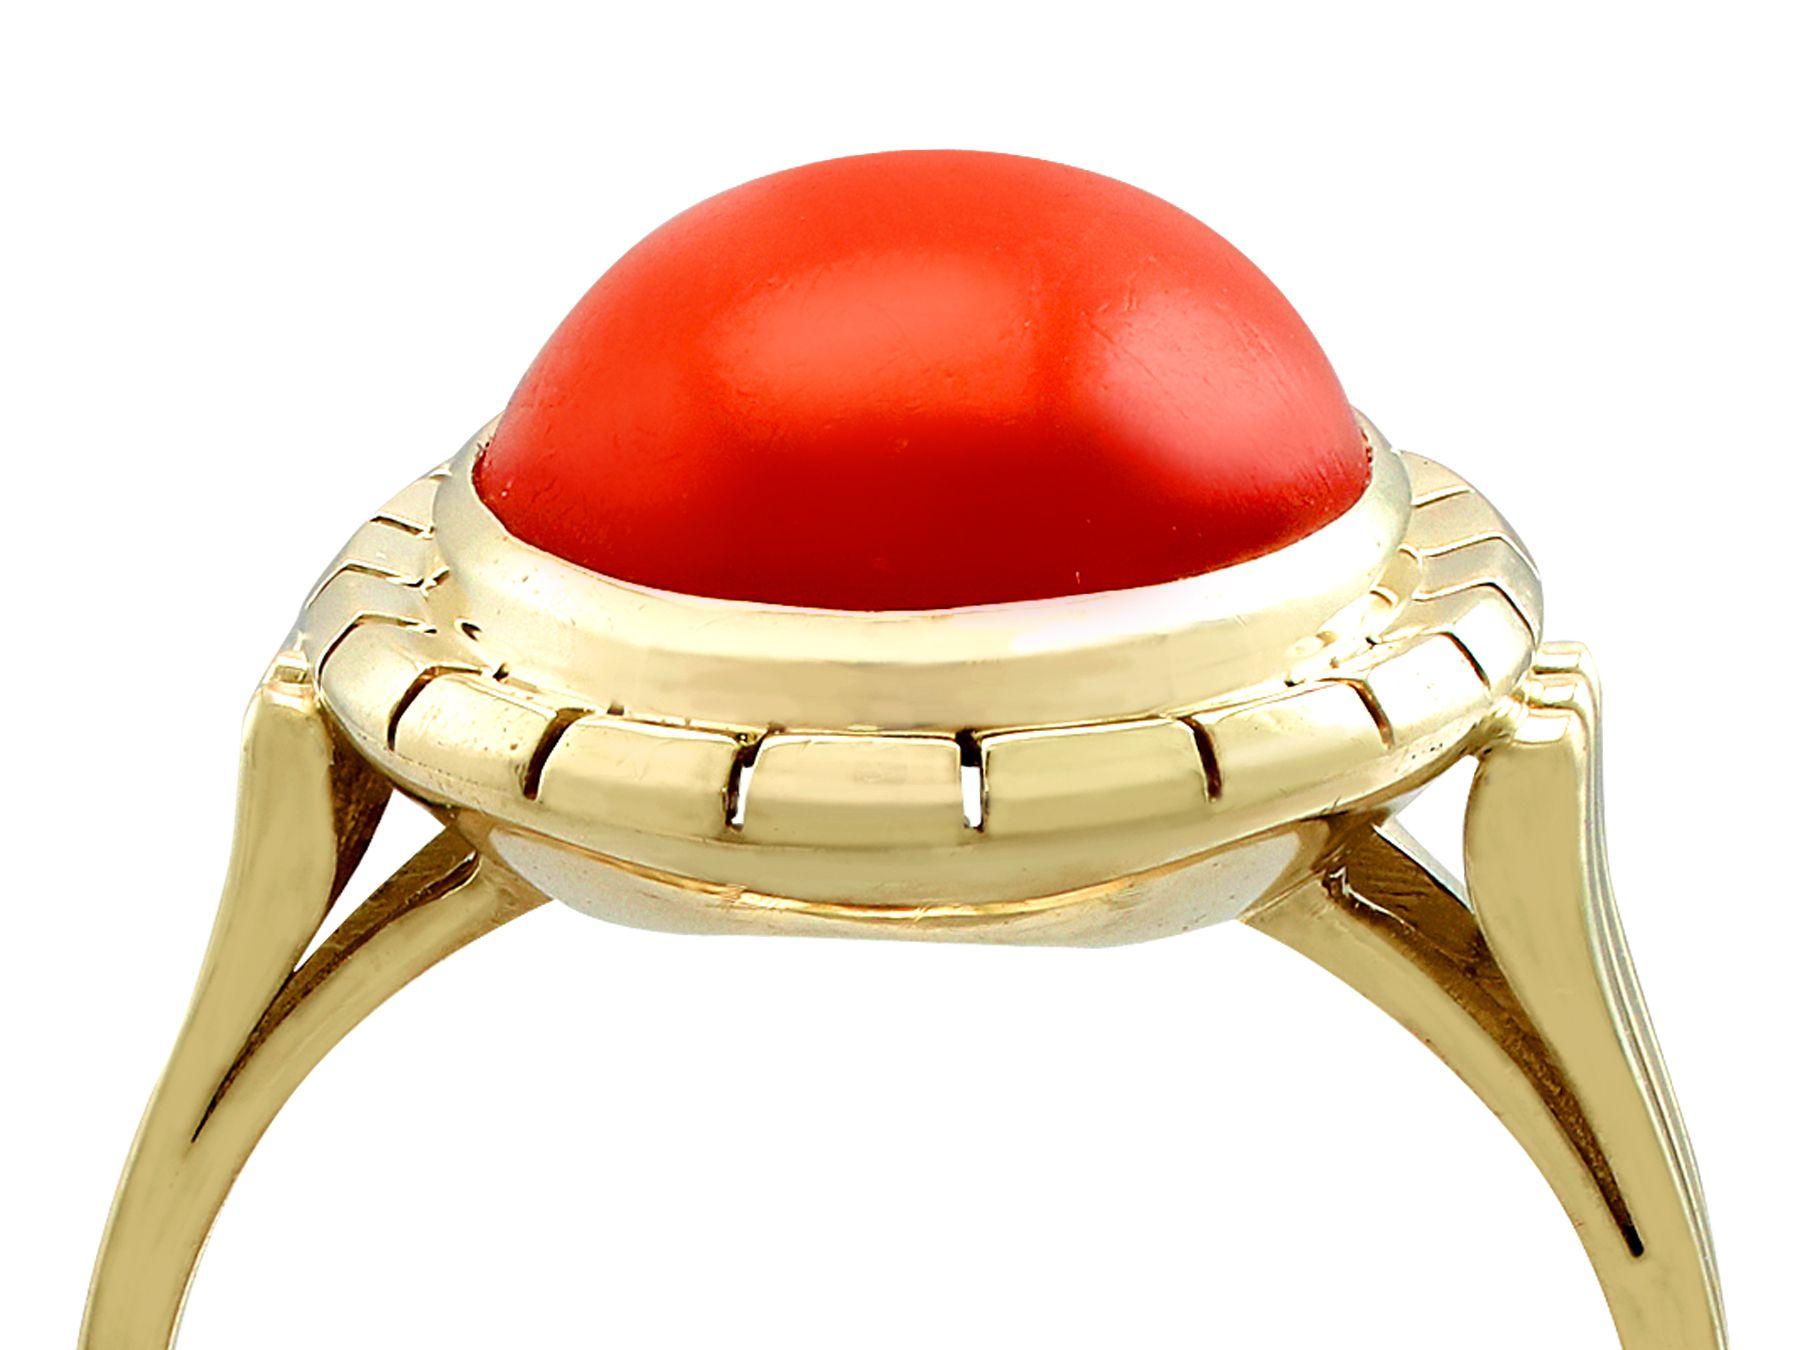 An impressive vintage 1940s 4.84 carat red coral and 14 karat yellow gold cocktail ring; part of our diverse gemstone jewelry and estate jewelry collections

This fine and impressive cabochon cut coral ring has been crafted in 14k yellow gold.

The